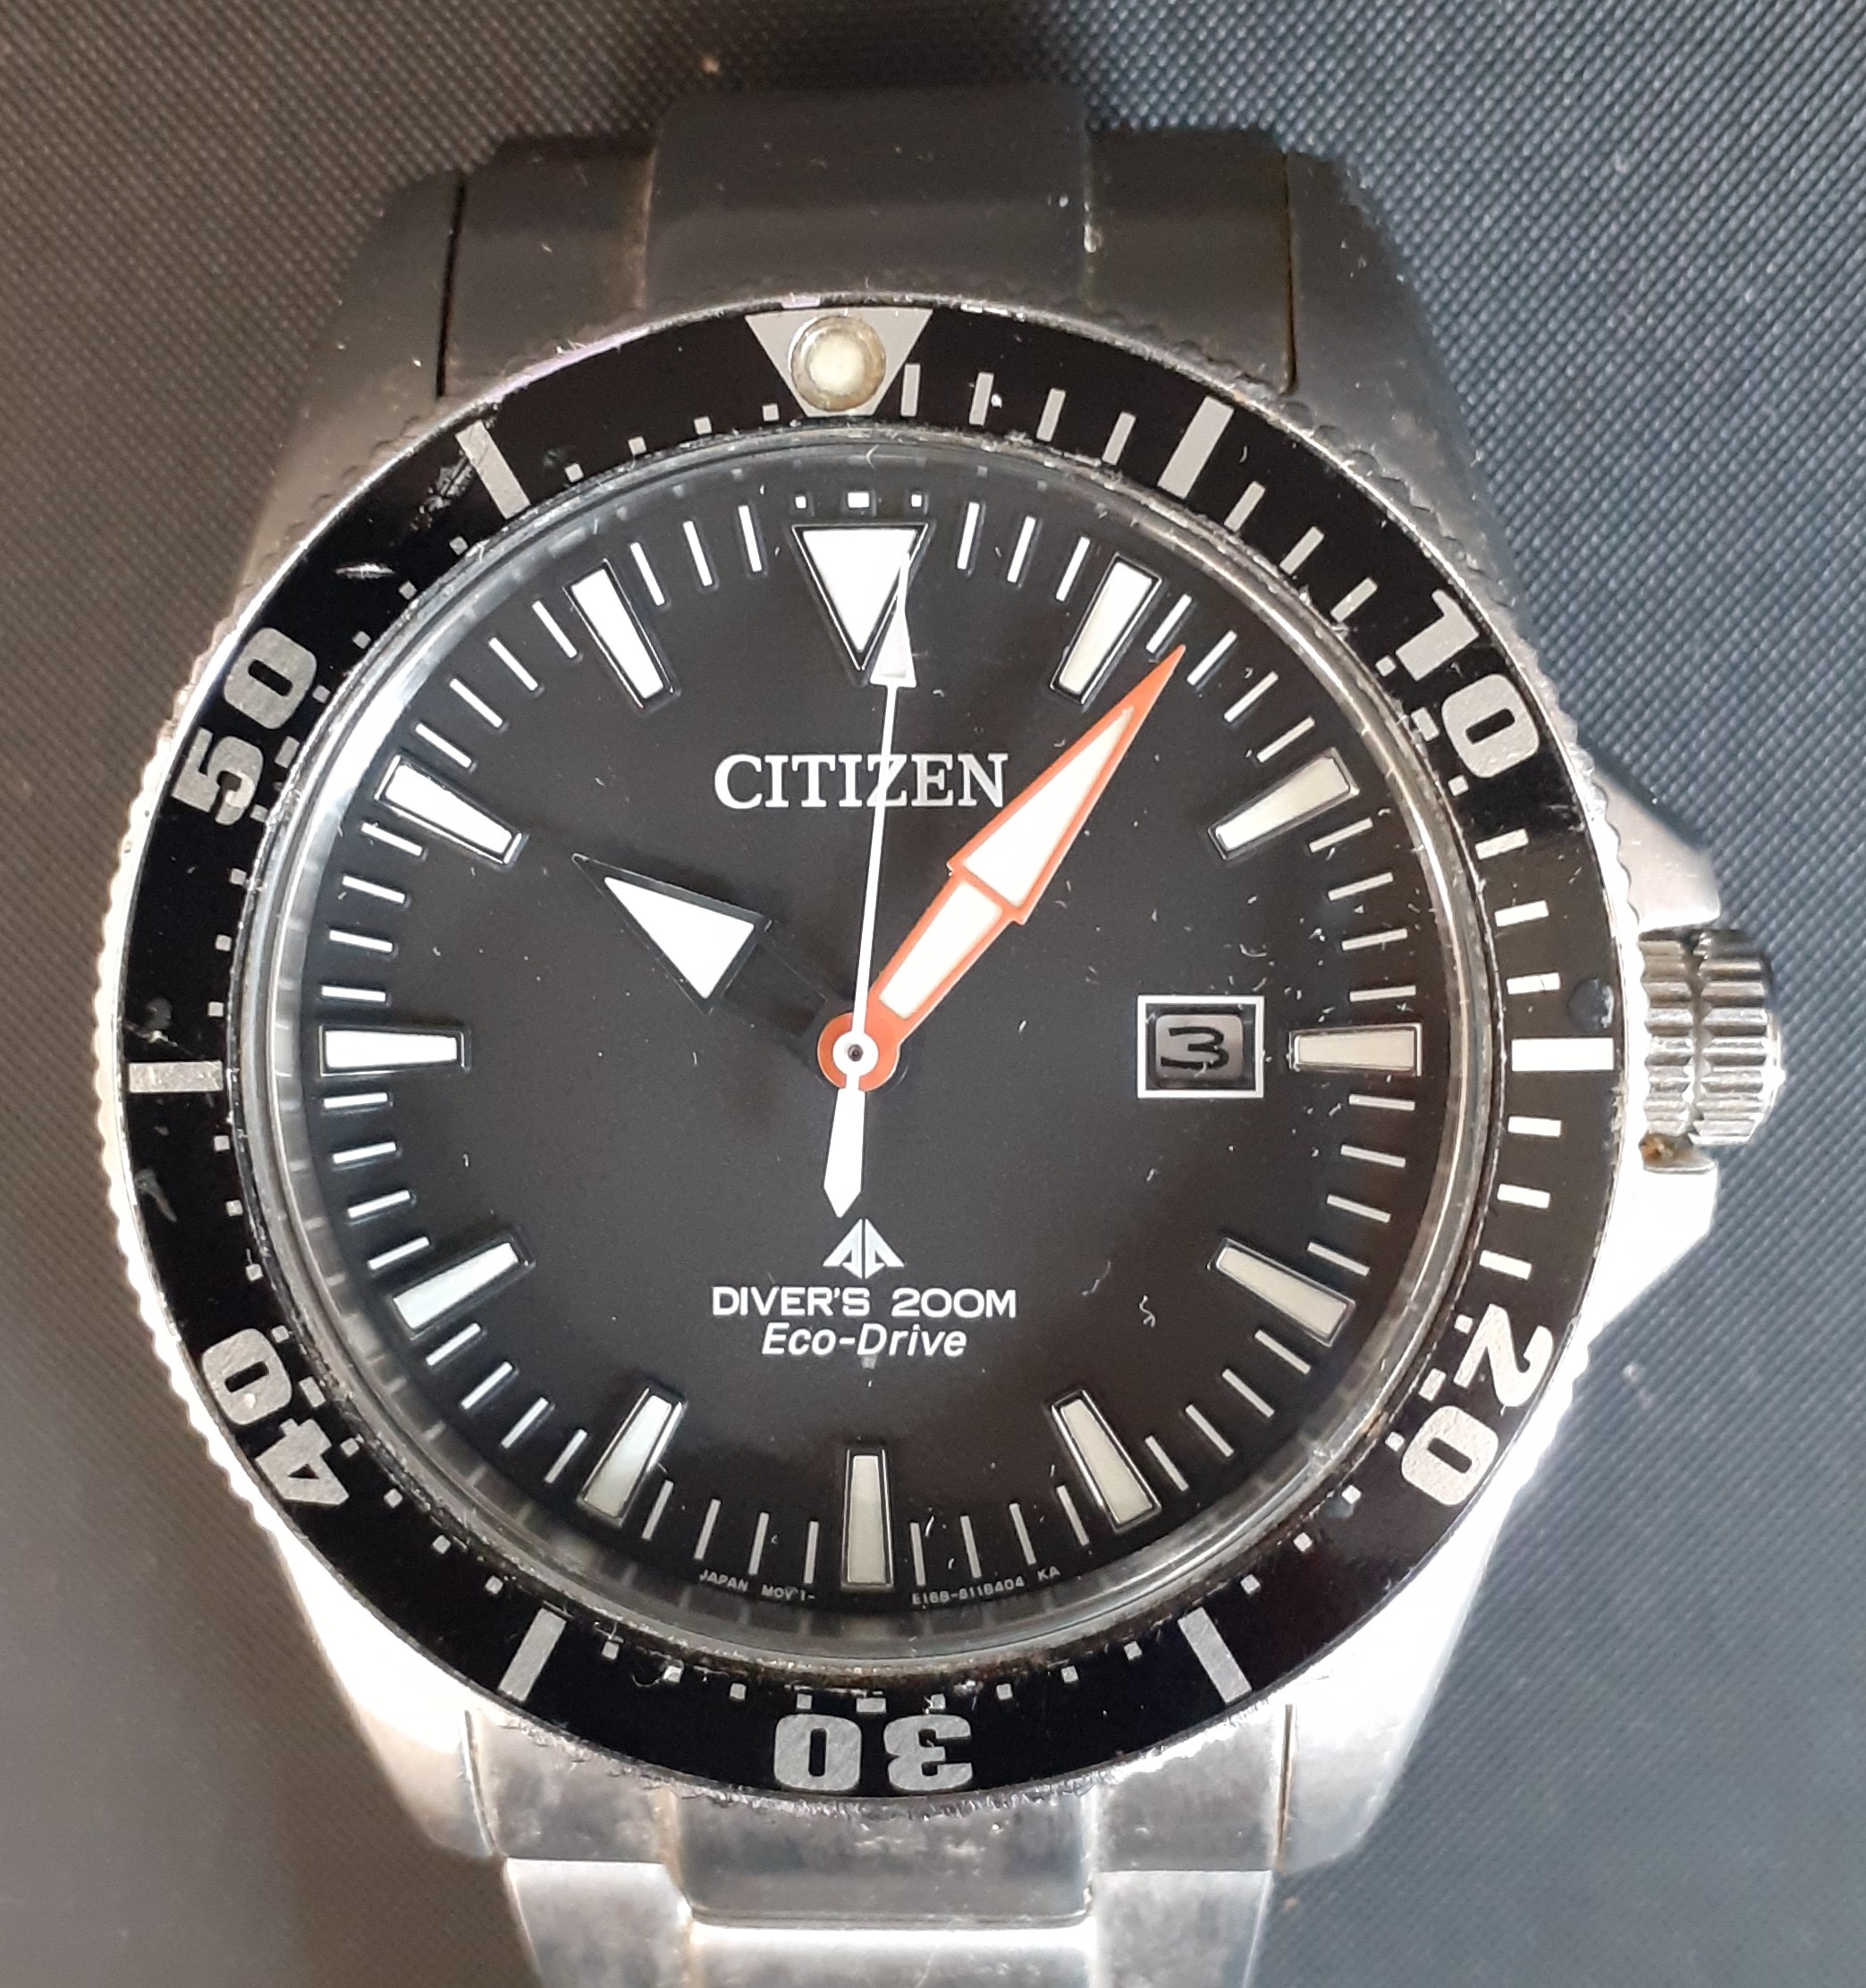 Citizen Promaster Eco-Drive Diver's 200m wristwatch with date aperture, hands and hour markers, - Image 2 of 4